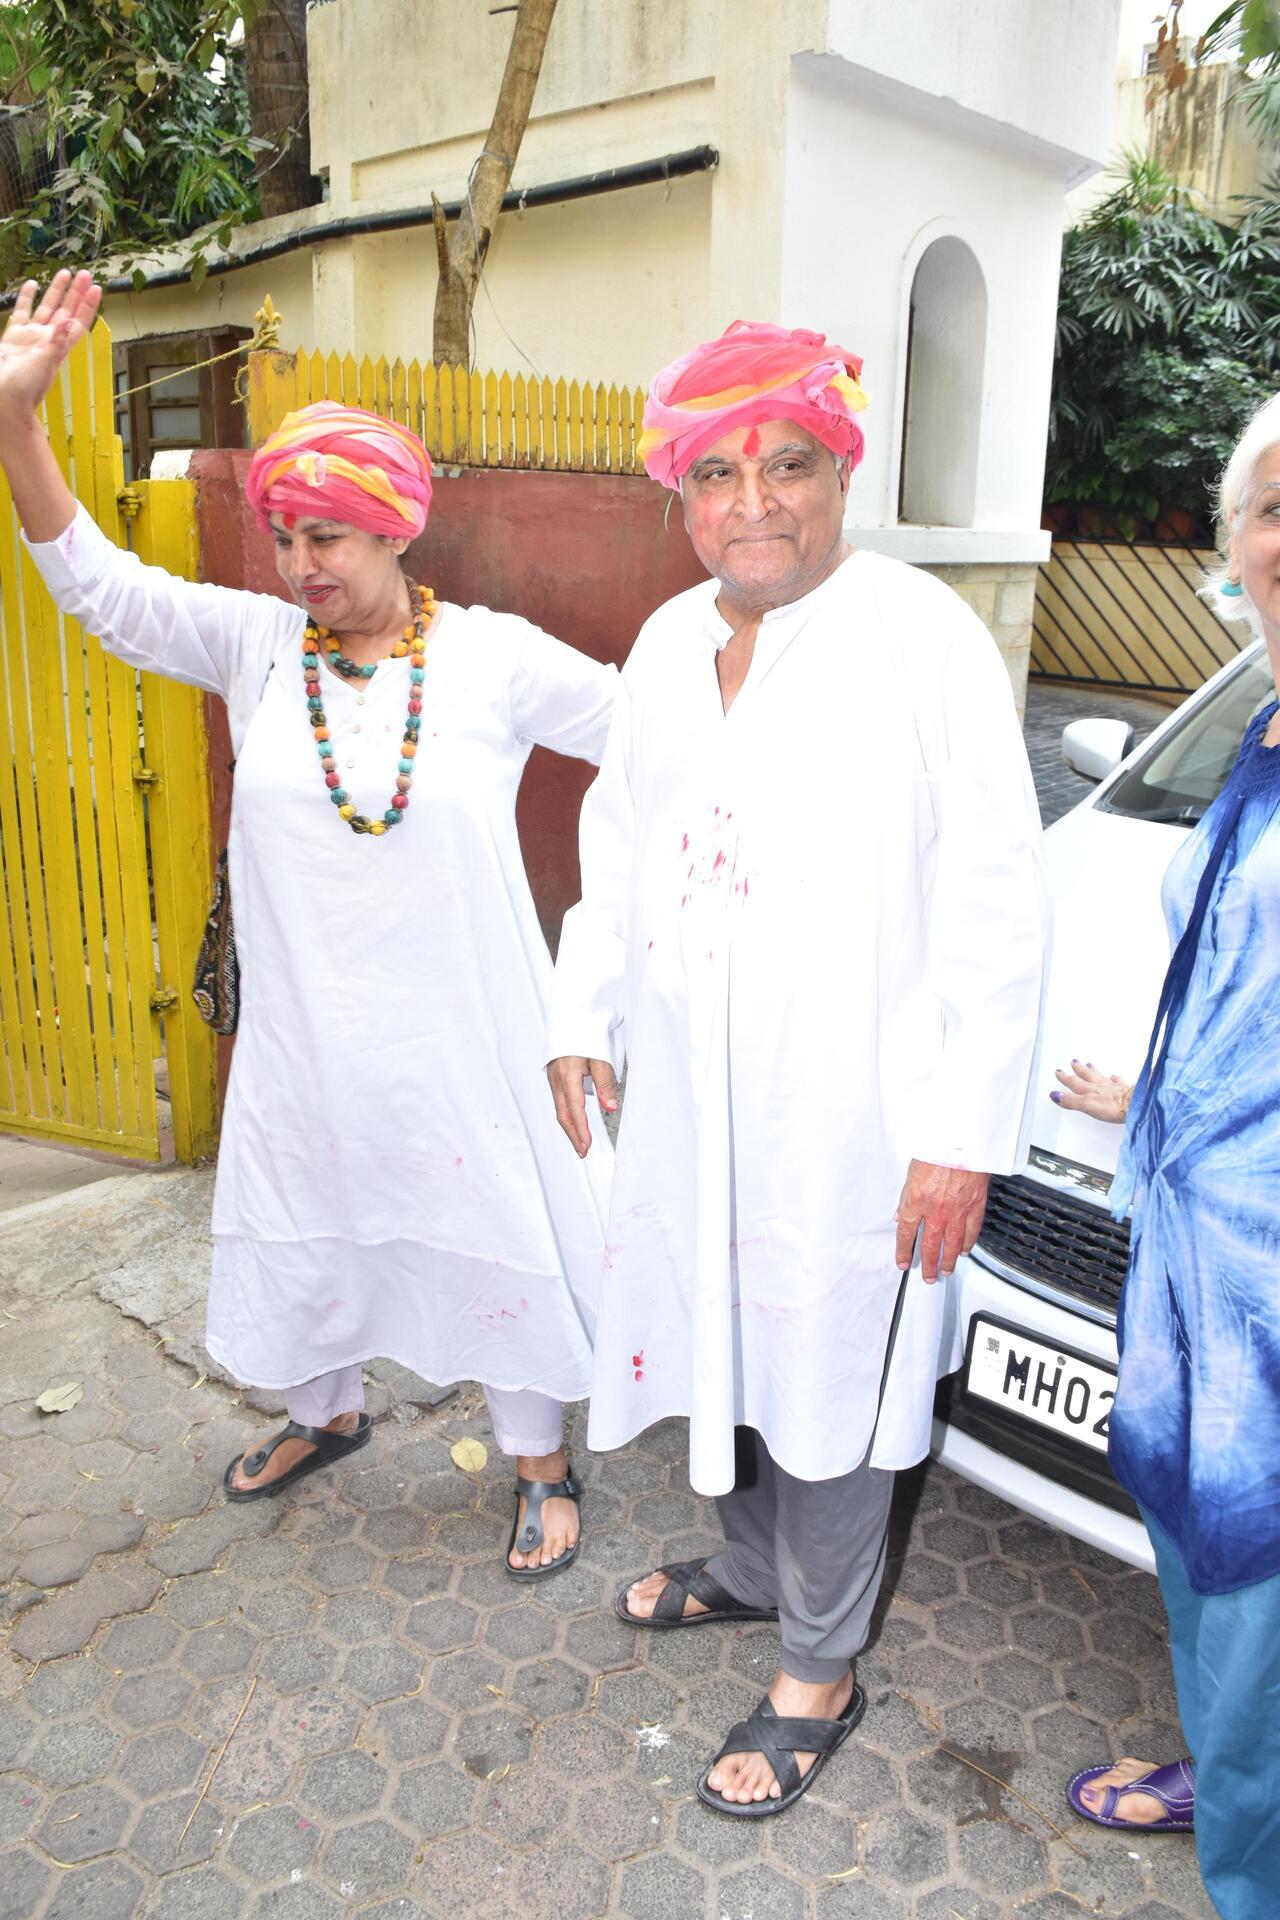 Javed Akhtar and Shabana Azmi were spotted by the paparazzi in town all ready to play Holi